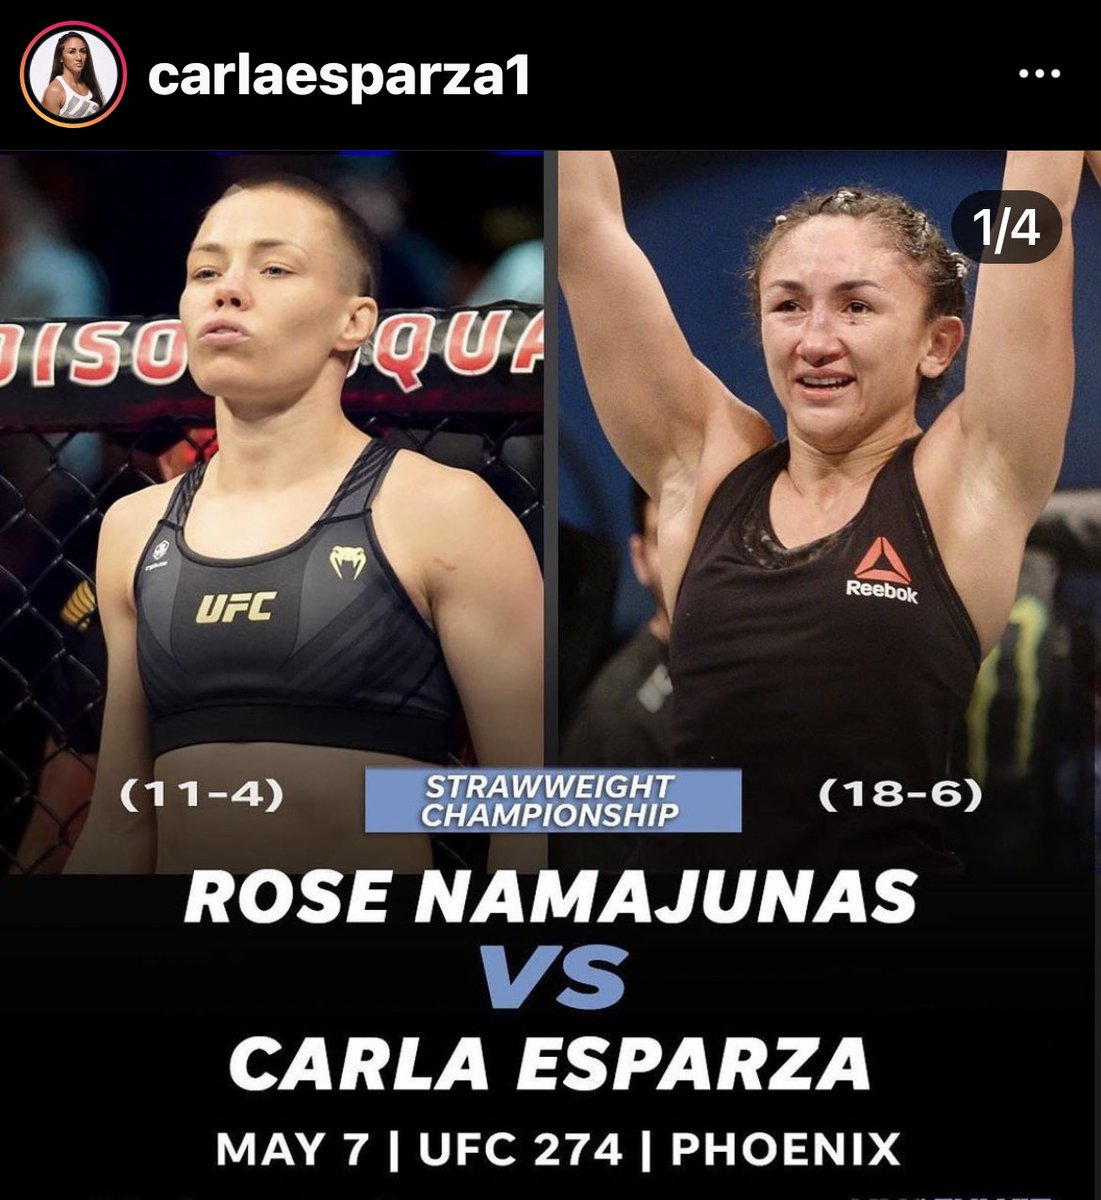 Let’s go @CarlaEsparza1 🔥🔥🔥🔥🔥🔥🔥🔥🔥🔥

Can’t wait for this! #TeamCarla #UFC #Crypto #May7